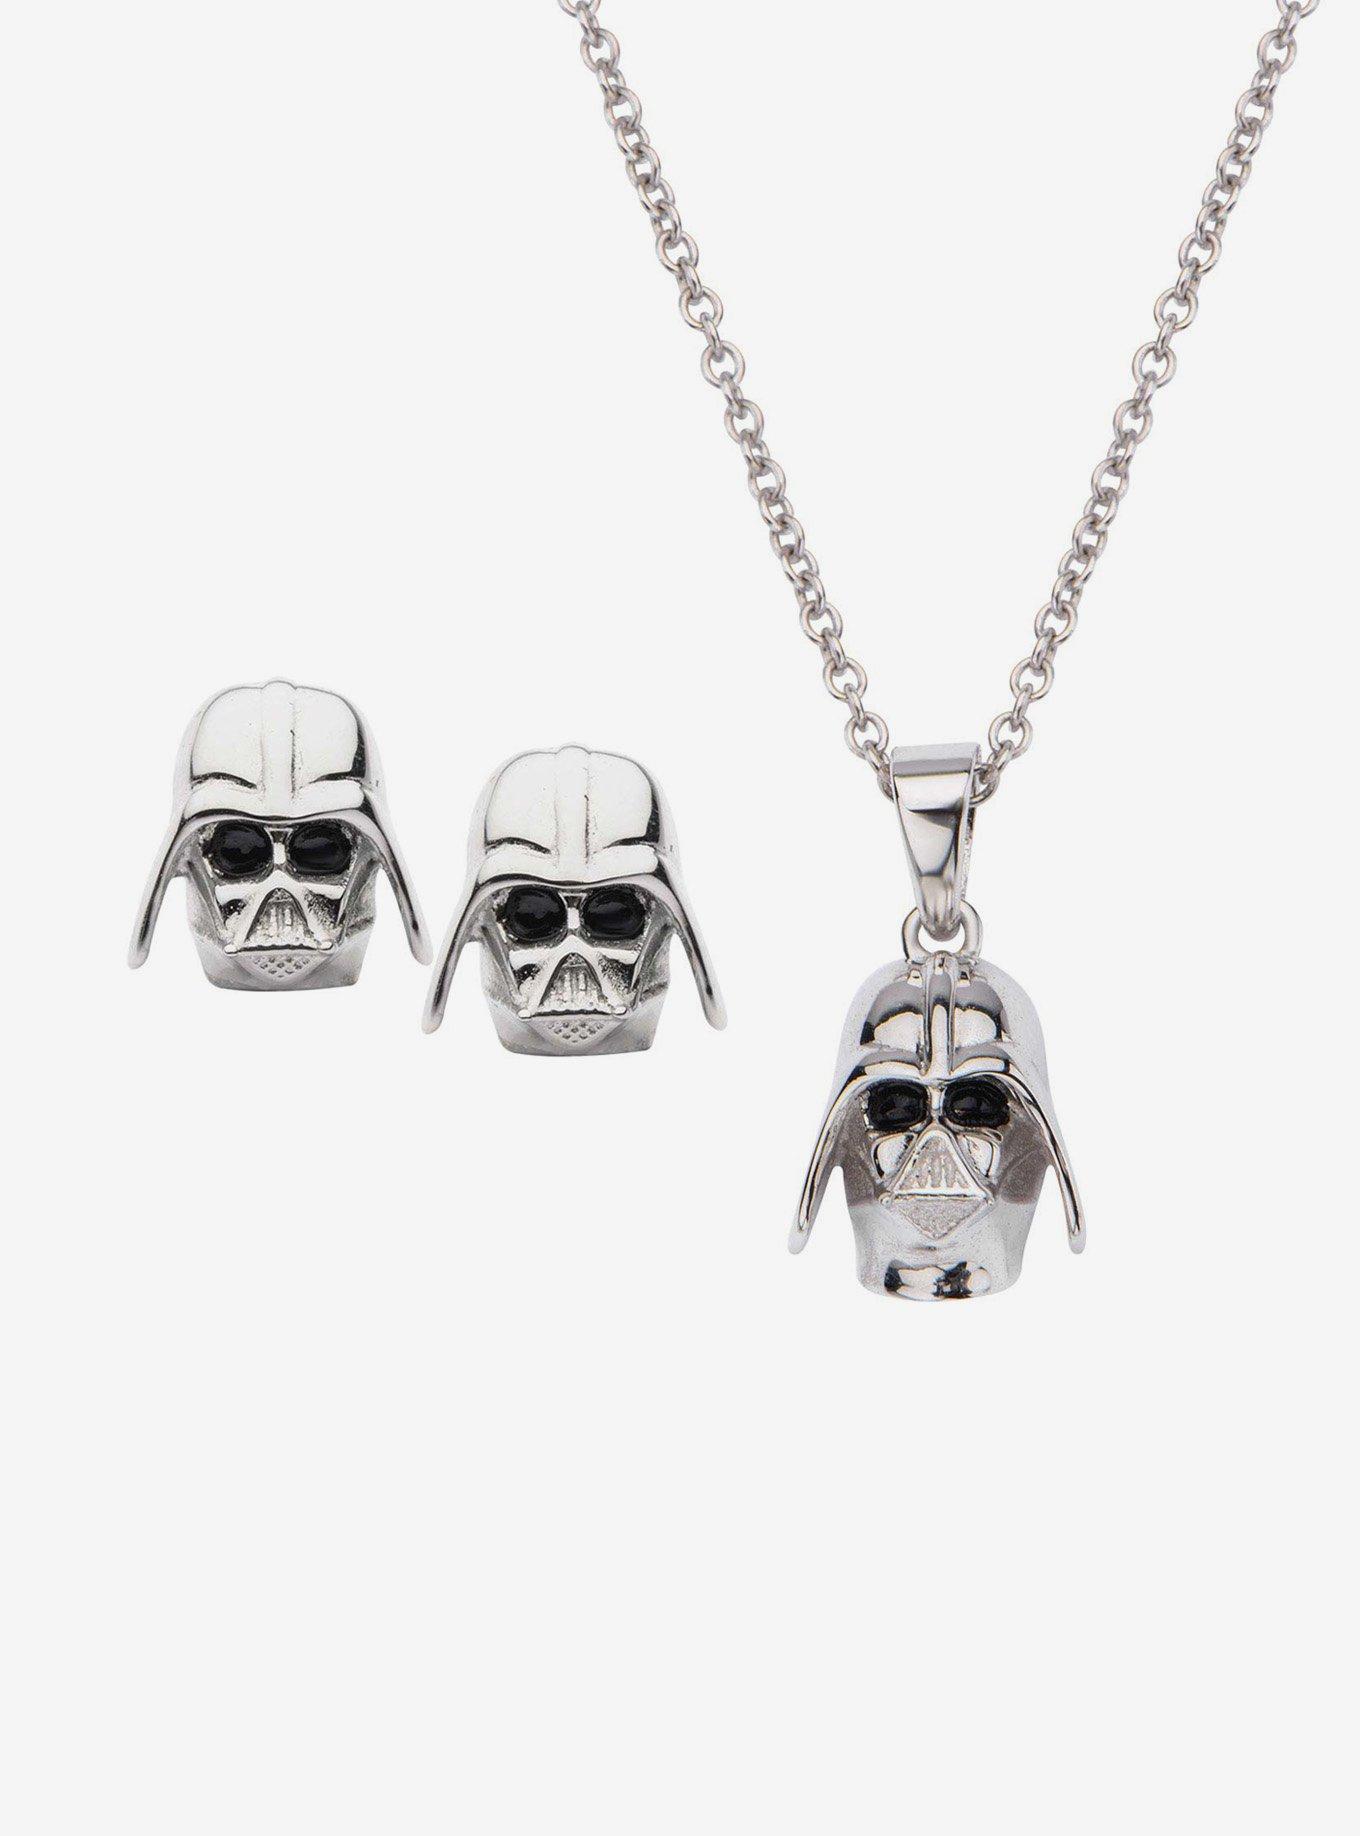 Star Wars 3D Darth Vader Stud Earrings and Pendant Necklace Set